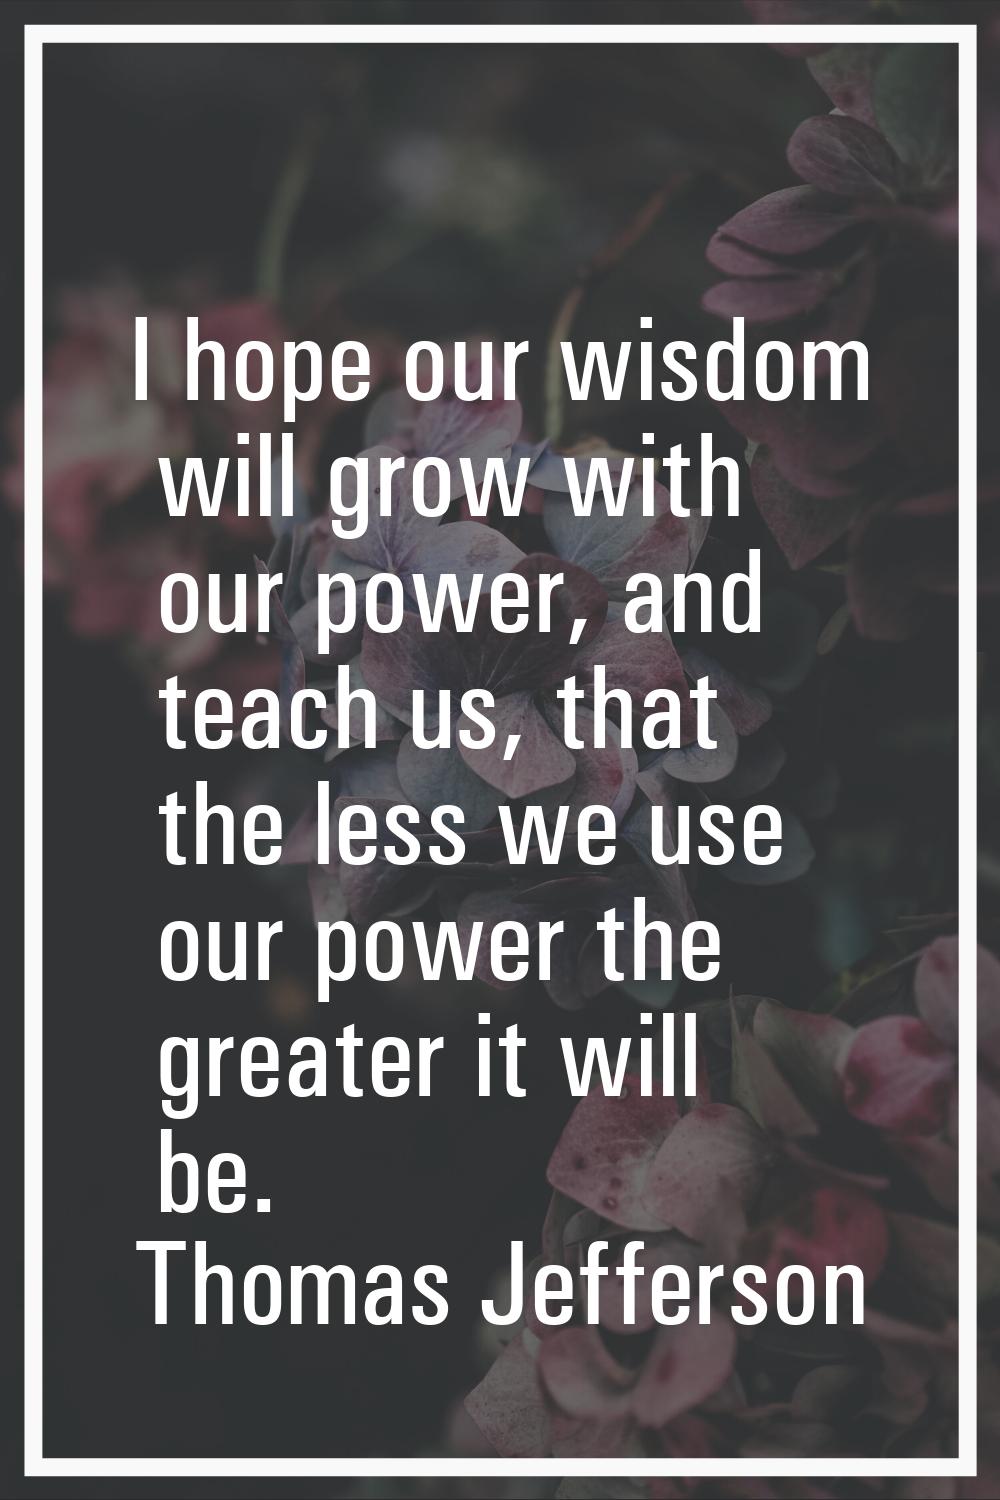 I hope our wisdom will grow with our power, and teach us, that the less we use our power the greate